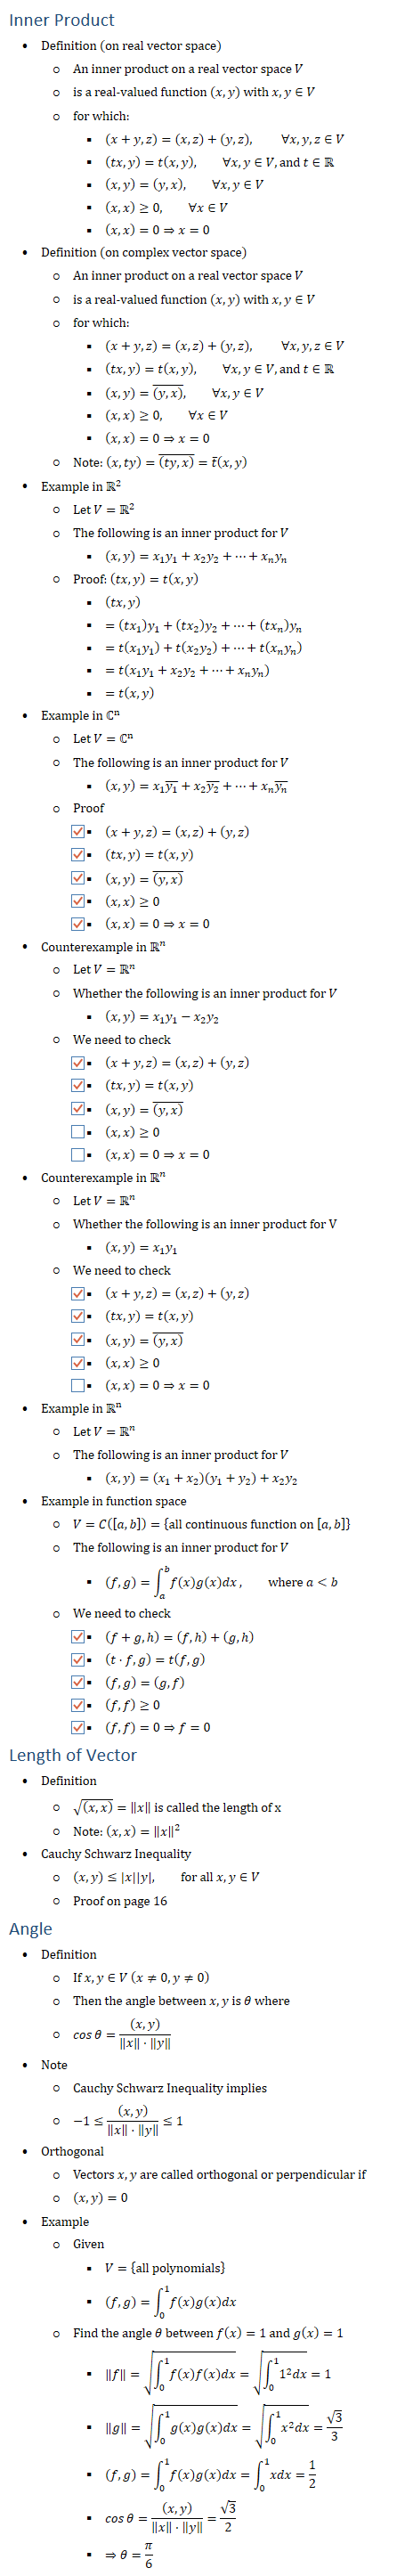 Inner Product • Definition (on real vector space) ○ An inner product on a real vector space V ○ is a real-valued function (x,y) with x,y∈V ○ for which: § (x+y,z)=(x,z)+(y,z), \ ∀x,y,z∈V § (tx,y)=t(x,y), ∀x,y∈V,and t∈R § (x,y)=(y,x), ∀x,y∈V § (x,x)≥0, ∀x∈V § (x,x)=0⇒x=0 • Definition (on complex vector space) ○ An inner product on a real vector space V ○ is a real-valued function (x,y) with x,y∈V ○ for which: § (x+y,z)=(x,z)+(y,z), \ ∀x,y,z∈V § (tx,y)=t(x,y), ∀x,y∈V,and t∈R § (x,y)=((y,x) ) ̅, ∀x,y∈V § (x,x)≥0, ∀x∈V § (x,x)=0⇒x=0 ○ Note: (x,ty)=((ty,x) ) ̅=t ̅(x,y) • Example in R2 ○ Let V=R2 ○ The following is an inner product for V § (x,y)=x_1 y_1+x_2 y_2+…+x_n y_n ○ Proof: (tx,y)=t(x,y) § (tx,y) § =(tx_1 ) y_1+(tx_2 ) y_2+…+(tx_n ) y_n § =t(x_1 y_1 )+t(x_2 y_2 )+…+t(x_n y_n ) § =t(x_1 y_1+x_2 y_2+…+x_n y_n ) § =t(x,y) • Example in ℂ^n ○ Let V=ℂ^n ○ The following is an inner product for V § (x,y)=x_1 (y_1 ) ̅+x_2 (y_2 ) ̅+…+x_n (y_n ) ̅ ○ Proof § (x+y,z)=(x,z)+(y,z) § (tx,y)=t(x,y) § (x,y)=((y,x) ) ̅ § (x,x)≥0 § (x,x)=0⇒x=0 • Counterexample in Rn ○ Let V=Rn ○ Whether the following is an inner product for V § (x,y)=x_1 y_1−x_2 y_2 ○ We need to check § (x+y,z)=(x,z)+(y,z) § (tx,y)=t(x,y) § (x,y)=((y,x) ) ̅ § (x,x)≥0 § (x,x)=0⇒x=0 • Counterexample in Rn ○ Let V=Rn ○ Whether the following is an inner product for V § (x,y)=x_1 y_1 ○ We need to check § (x+y,z)=(x,z)+(y,z) § (tx,y)=t(x,y) § (x,y)=((y,x) ) ̅ § (x,x)≥0 § (x,x)=0⇒x=0 • Example in Rn ○ Let V=Rn ○ The following is an inner product for V § (x,y)=(x_1+x_2 )(y_1+y_2 )+x_2 y_2 • Example in function space ○ V=C([a,b])={all continuous function on [a,b]} ○ The following is an inner product for V § (f,g)=∫_a^b▒f(x)g(x)dx, where a<b ○ We need to check § (f+g,h=(f,h+(g,h § (t⋅f,g)=t(f,g) § (f,g)=(g,f) § (f,f)≥0 § (f,f)=0⇒f=0 Length of Vector • Definition ○ √((x,x) )=‖x‖ is called the length of x ○ Note: (x,x)=‖x‖^2 • Cauchy Schwarz Inequality ○ (x,y)≤|x||y|, for all x,y∈V ○ Proof on page 16 Angle • Definition ○ If x,y∈V (x≠0,y≠0) ○ Then the angle between x,y is θ where ○ cos⁡θ=((x,y))/(‖x‖⋅‖y‖ ) • Note ○ Cauchy Schwarz Inequality implies ○ −1≤((x,y))/(‖x‖⋅‖y‖ )≤1 • Orthogonal ○ Vectors x,y are called orthogonal or perpendicular if ○ (x,y)=0 • Example ○ Given § V={all polynomials} § (f,g)=∫_0^1▒f(x)g(x)dx ○ Find the angle θ between f(x)=1 and g(x)=1 § ‖f‖=√(∫_0^1▒f(x)f(x)dx)=√(∫_0^1▒〖1^2 dx〗)=1 § ‖g‖=√(∫_0^1▒g(x)g(x)dx)=√(∫_0^1▒〖x^2 dx〗)=√3/3 § (f,g)=∫_0^1▒f(x)g(x)dx=∫_0^1▒xdx=1/2 § cos⁡θ=((x,y))/(‖x‖⋅‖y‖ )=√3/2 § ⇒θ=π/6